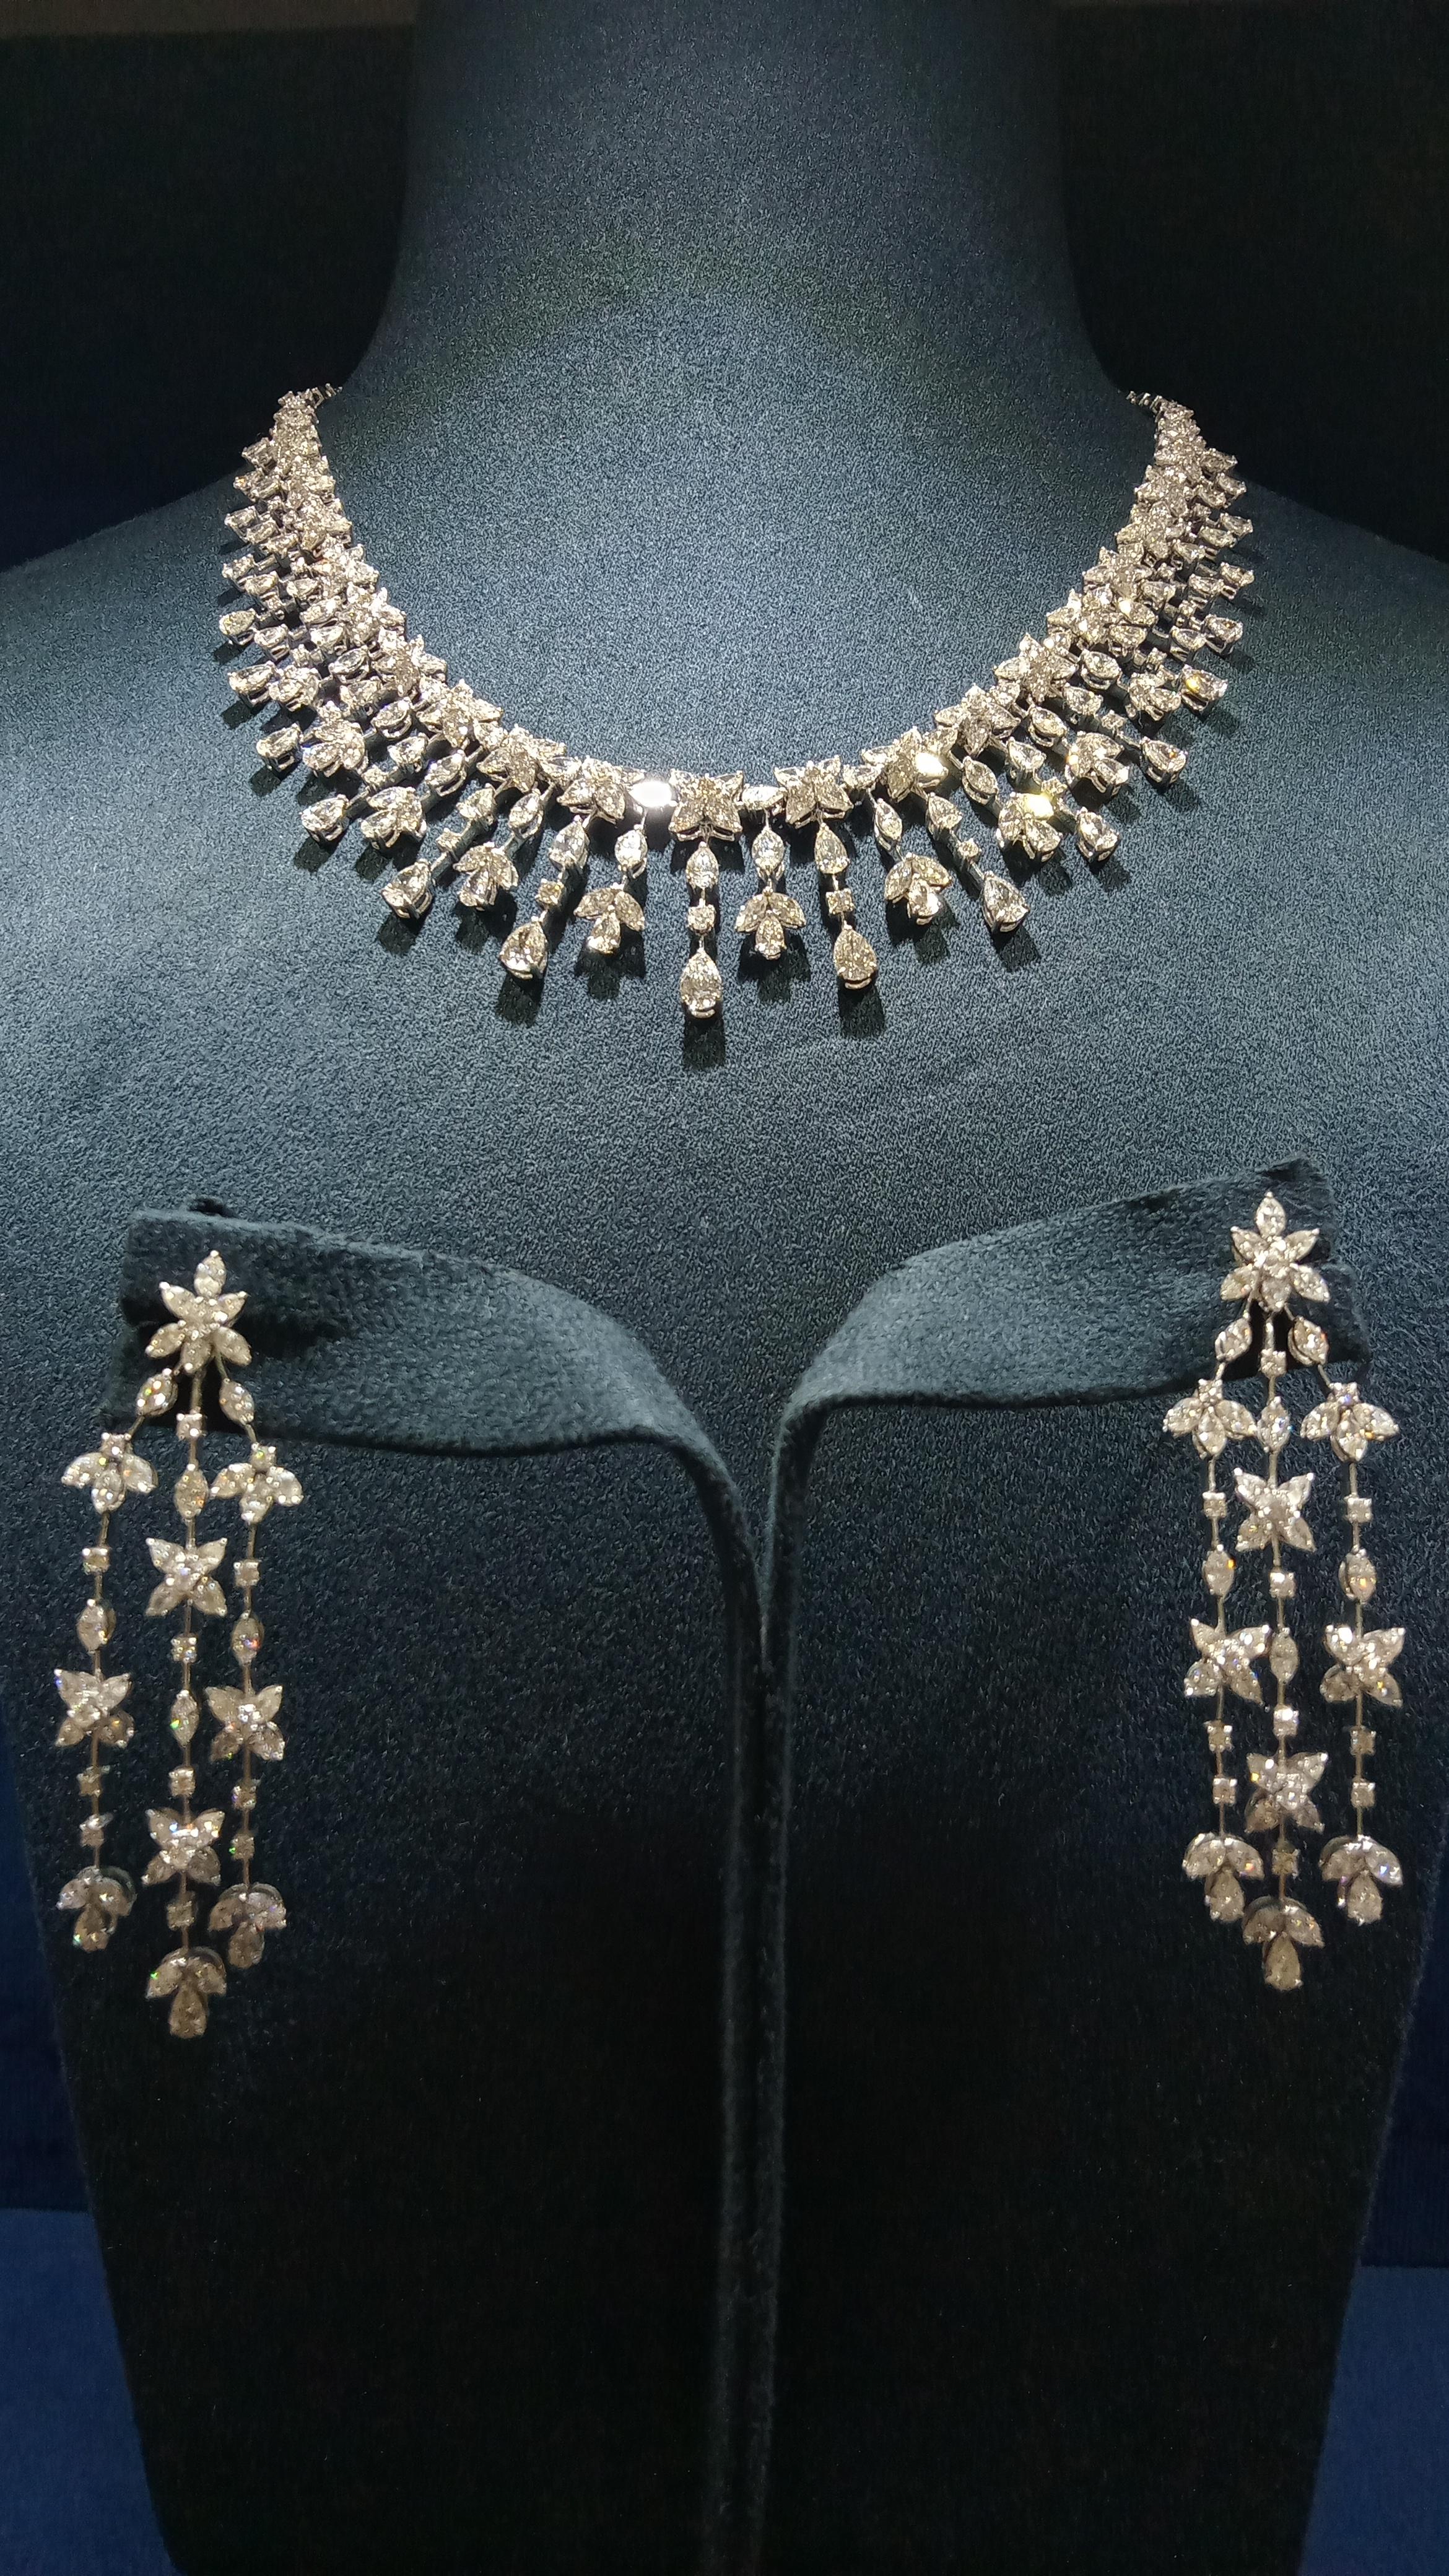 14 Karat White Gold Fancy Shape Diamond Necklace With Earrings In New Condition For Sale In New Delhi, Delhi